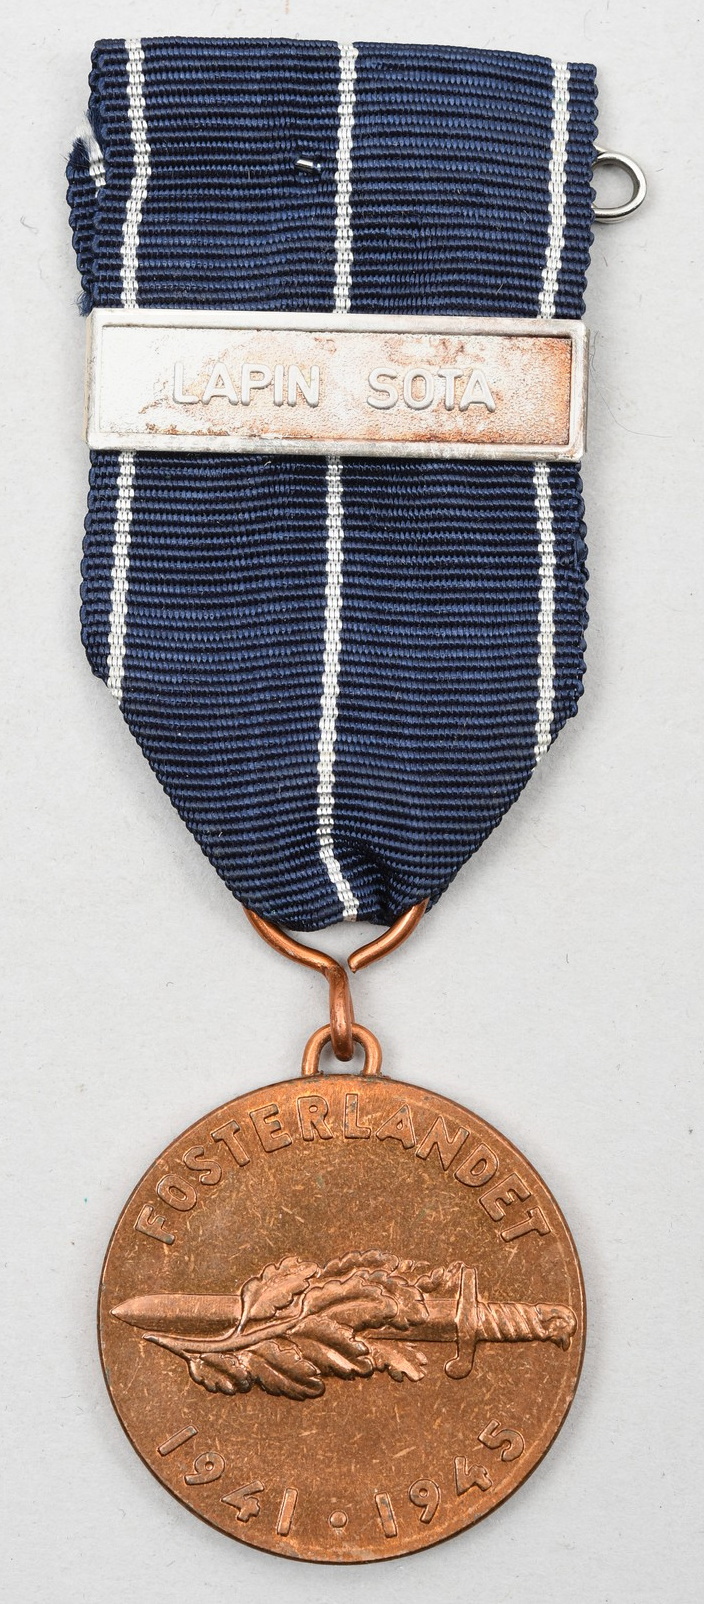 Finnish Commemorative medal of Continuation War With Lapin Sota